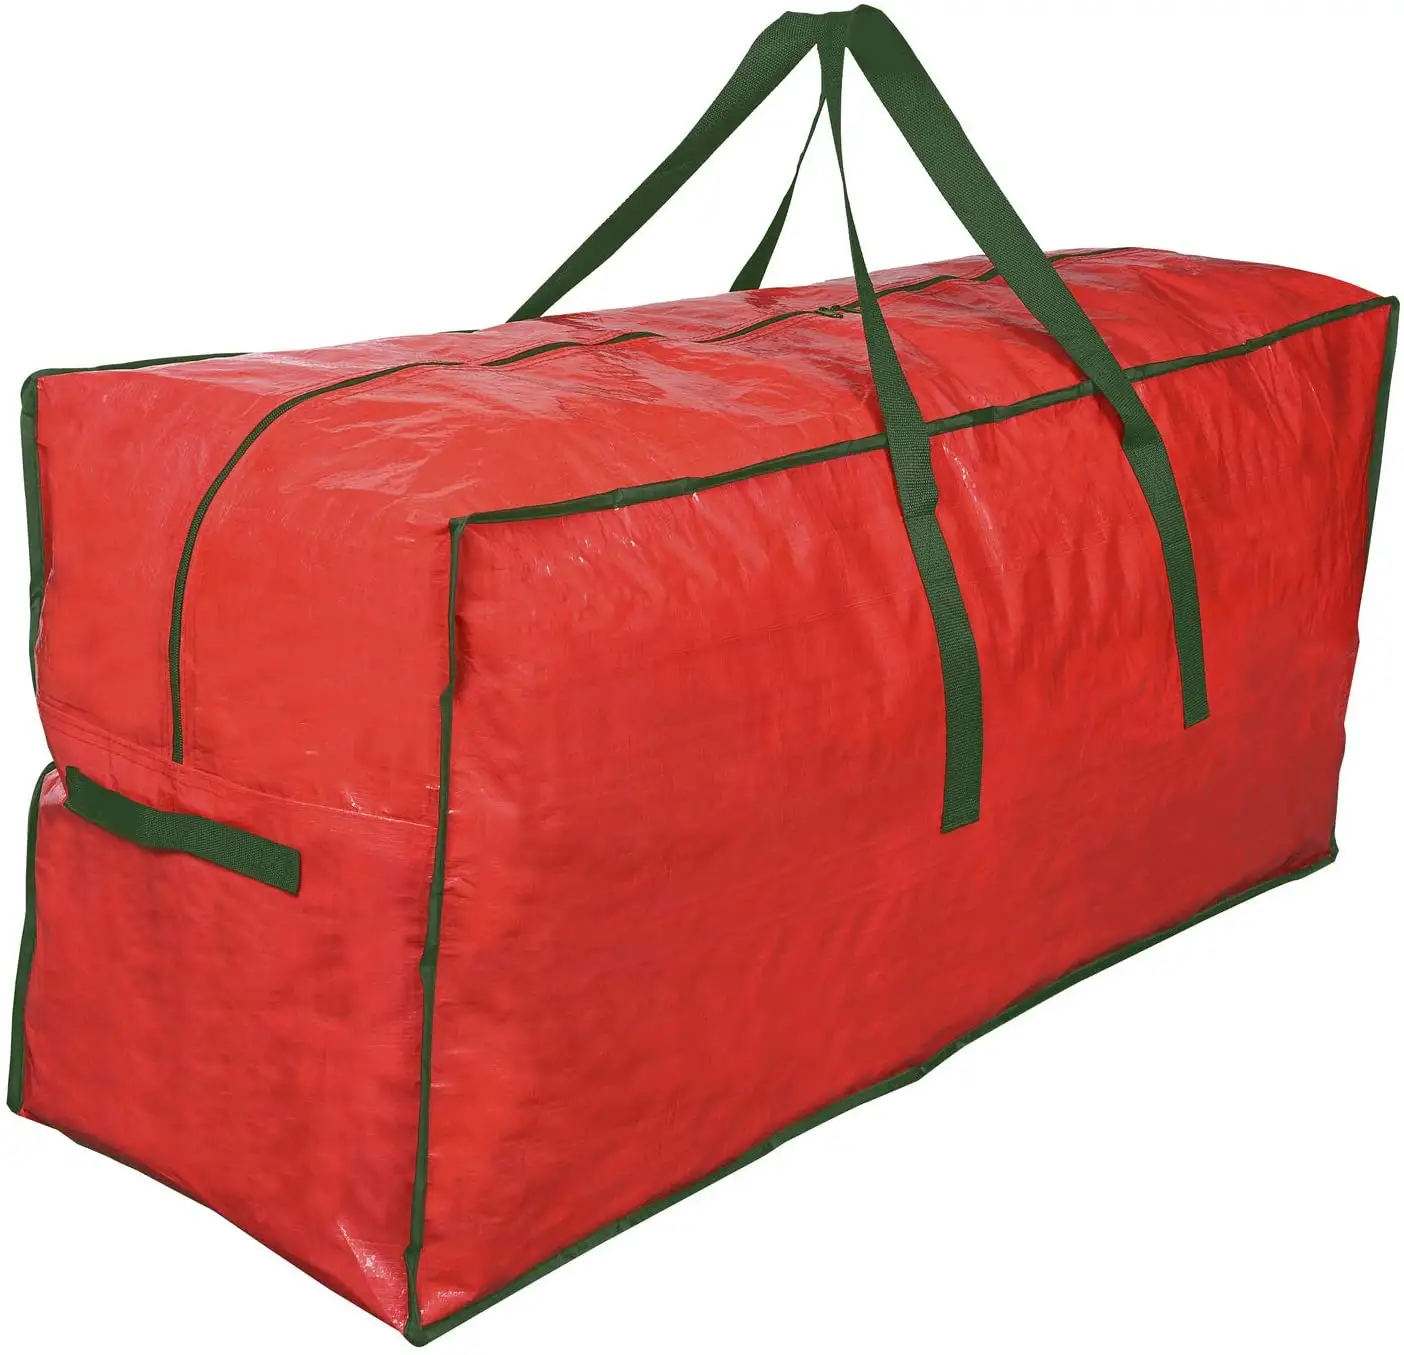 Christmas Tree Storage Bag Fits Up to 9 Ft. Tall Disassembled Tree 65 X 15X 30 IN Holiday Tree Storage Case